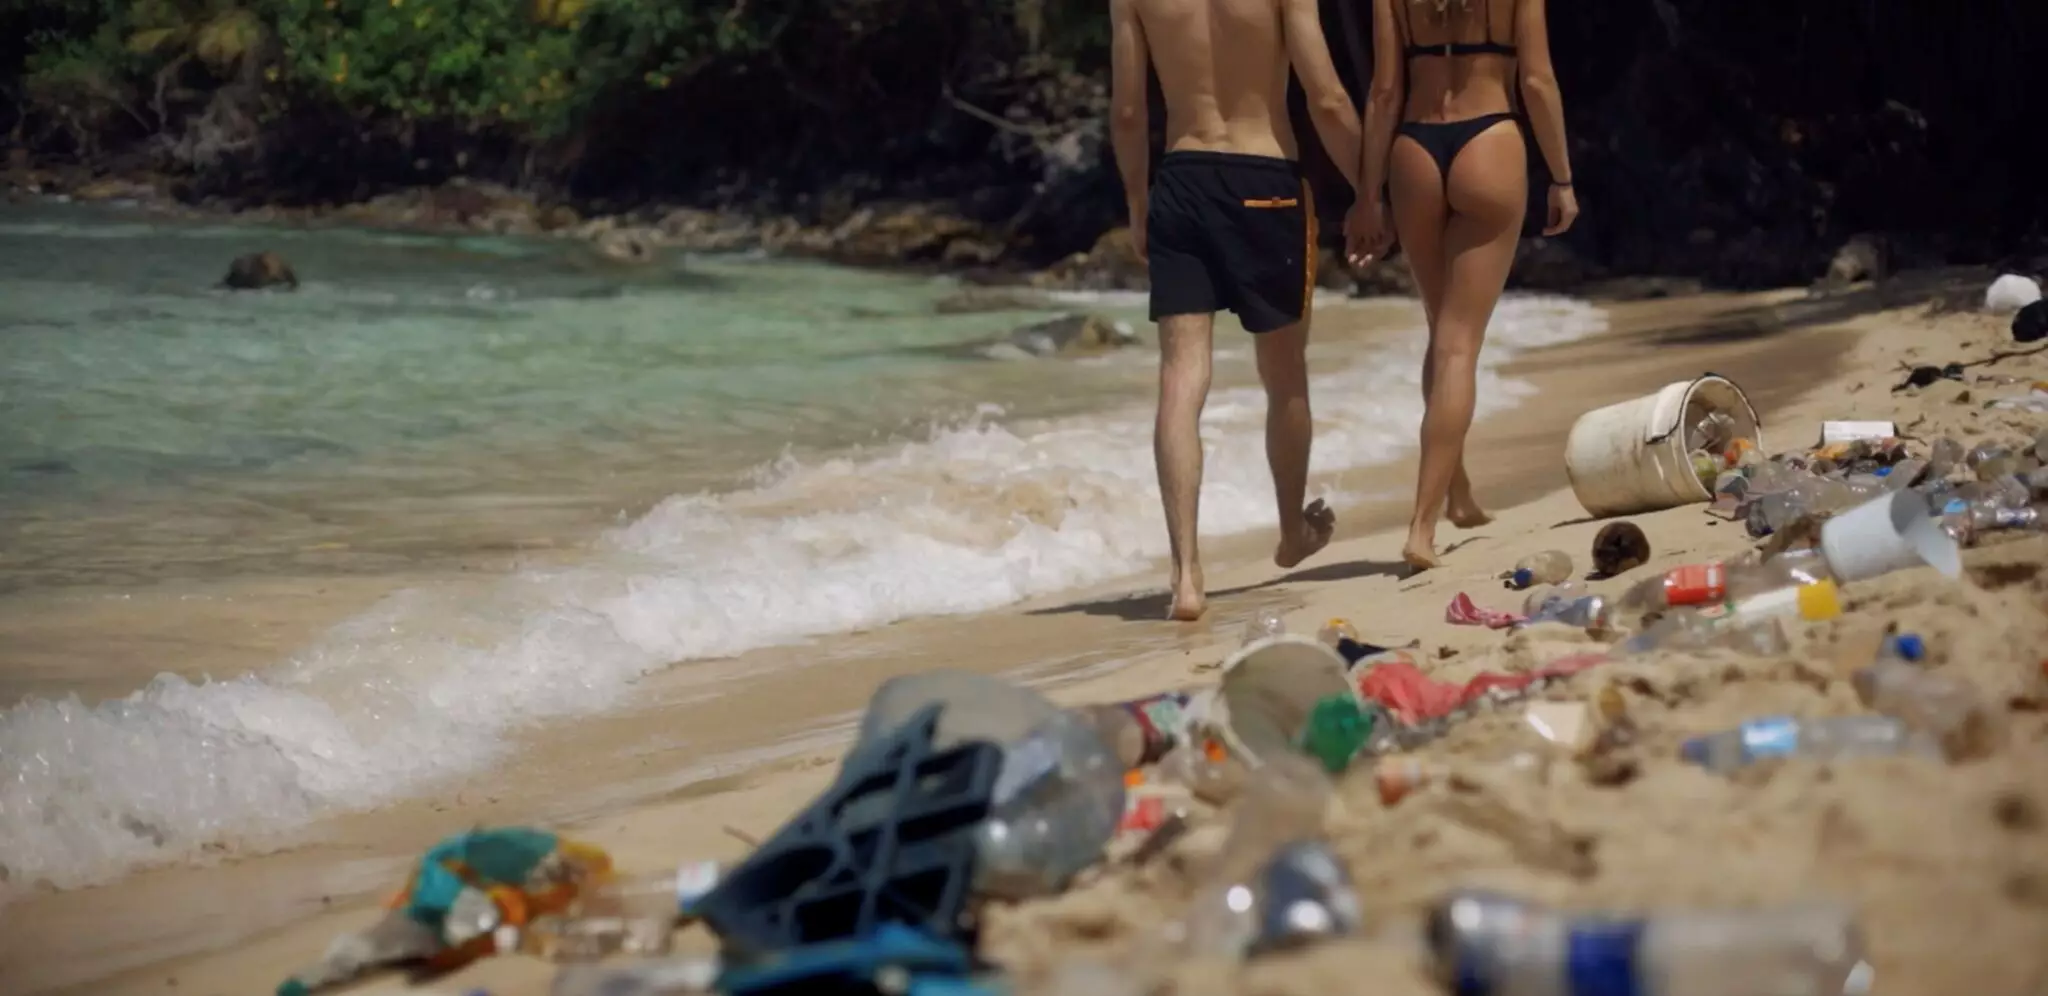 Pornhub say their website should be dirty, not the world's beaches.